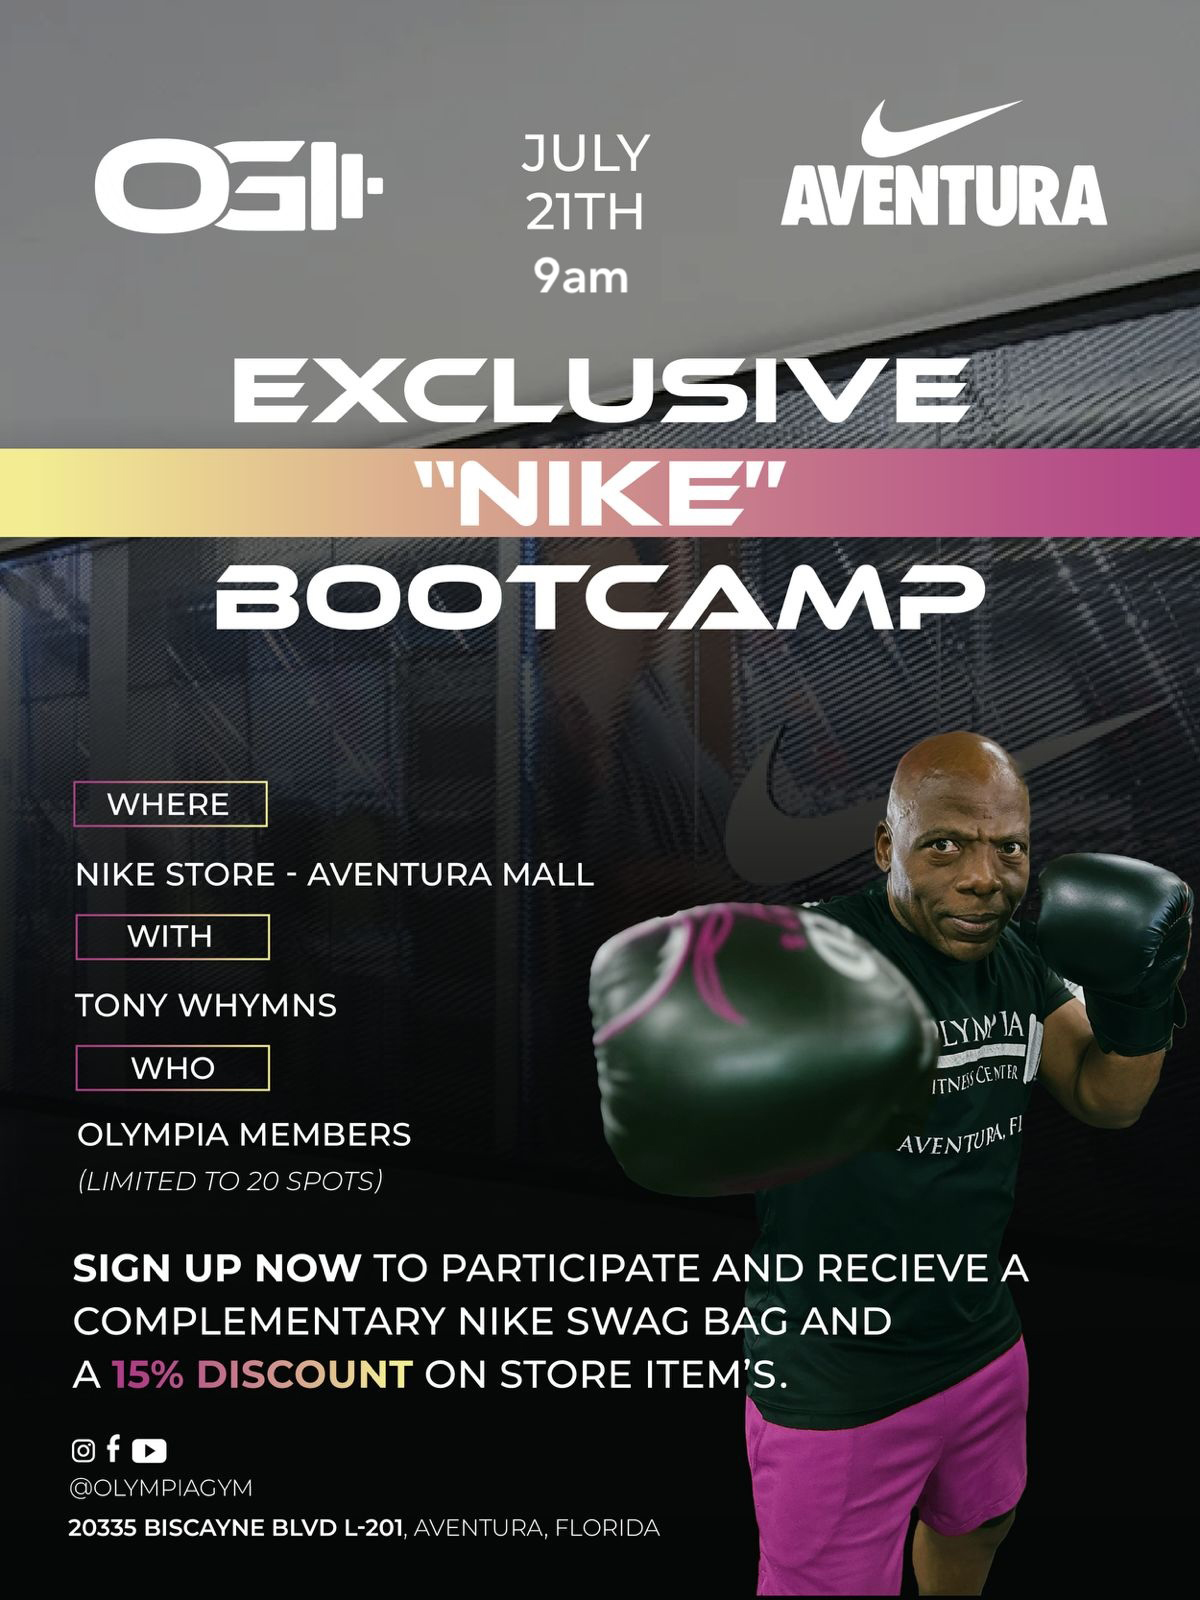 Exclusive "Nike" Bootcamp Class